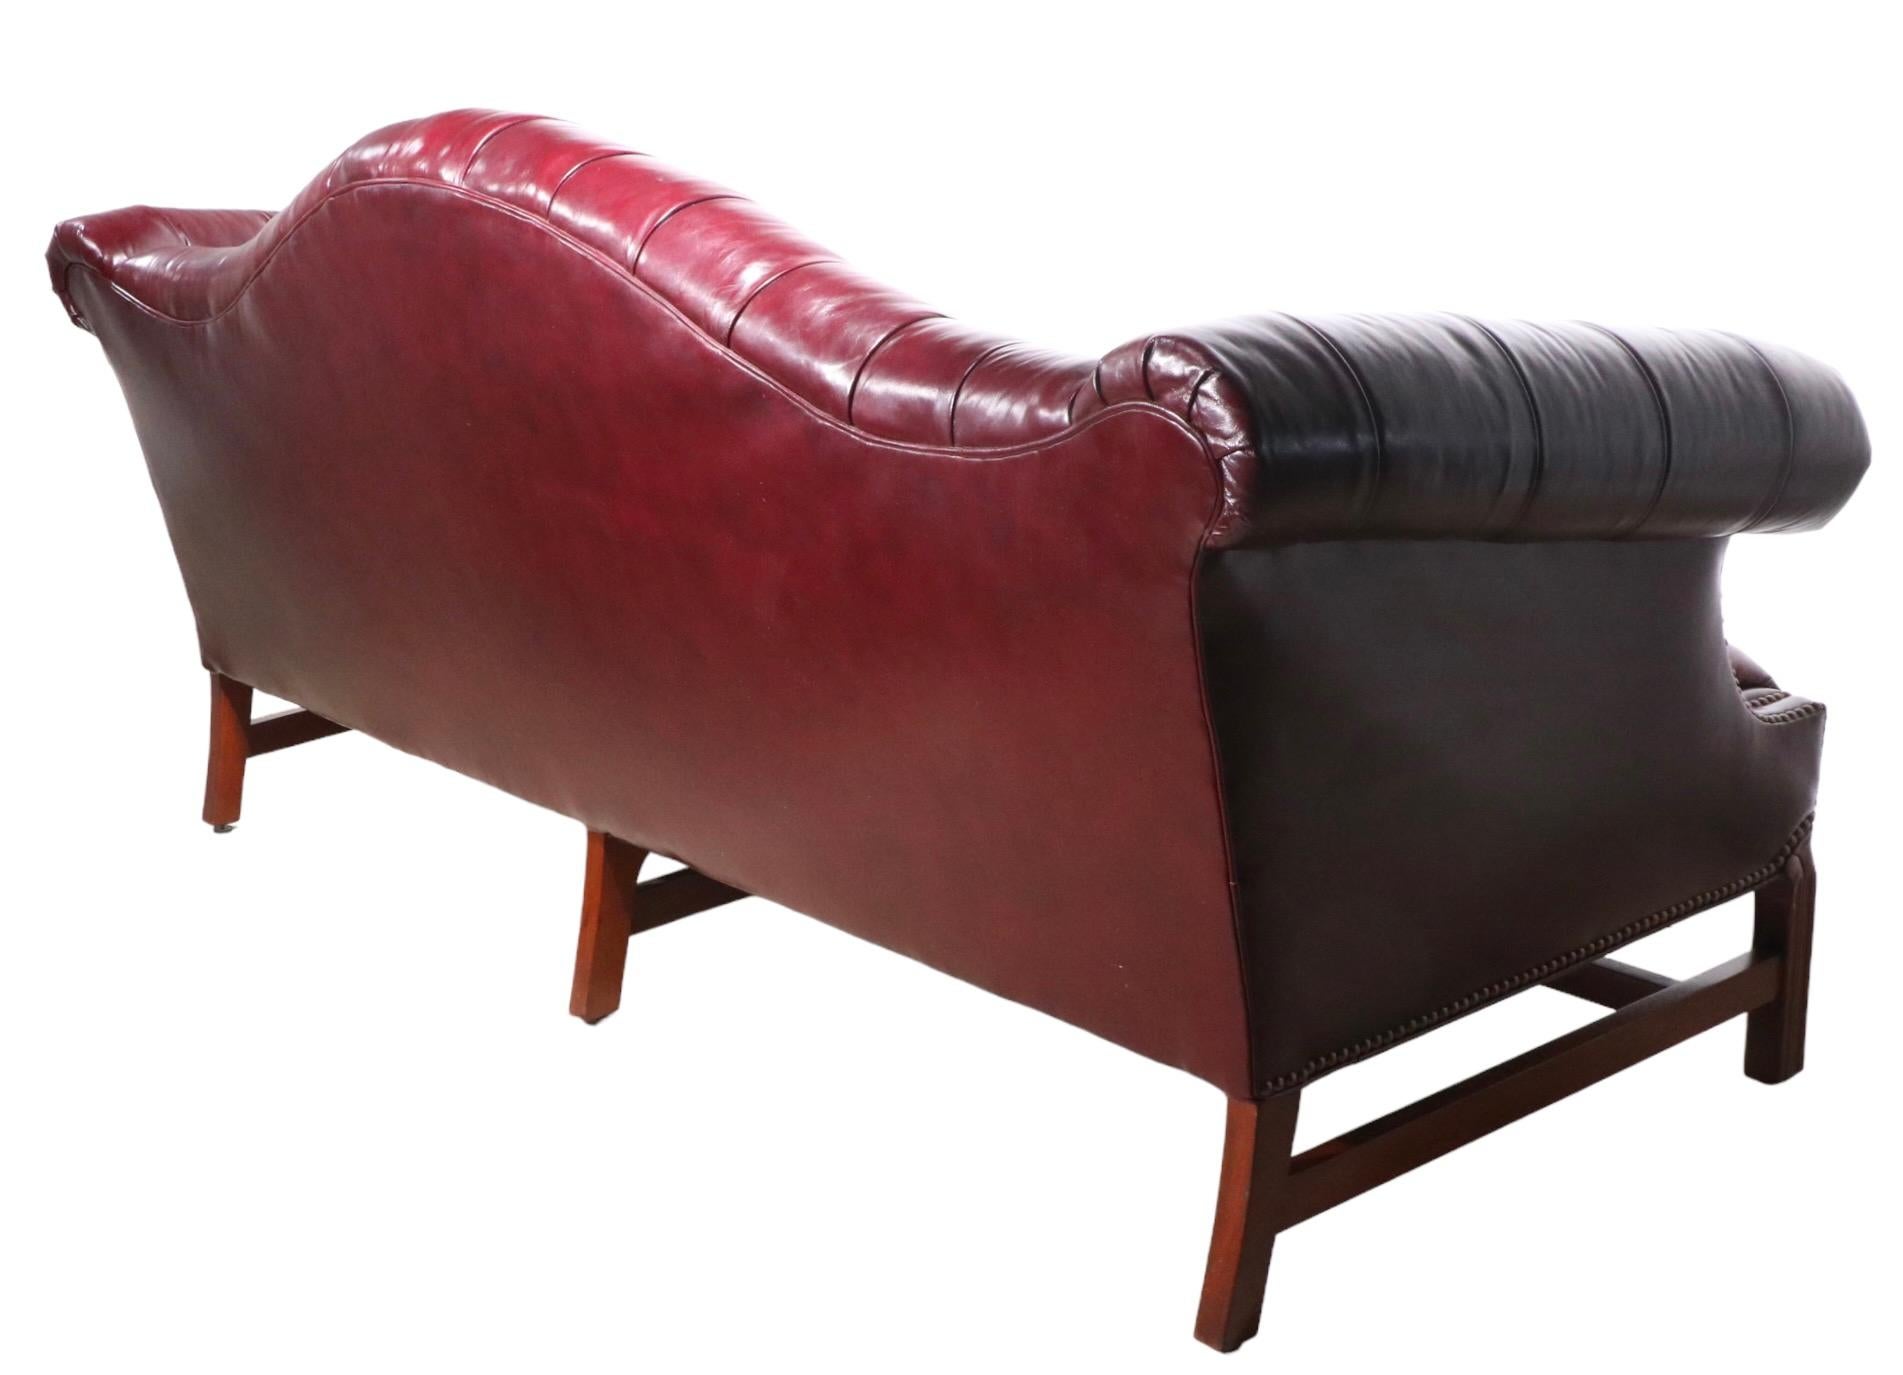  Tufted Burgundy  Leather Chesterfield Sofa c 1950/1960's For Sale 1